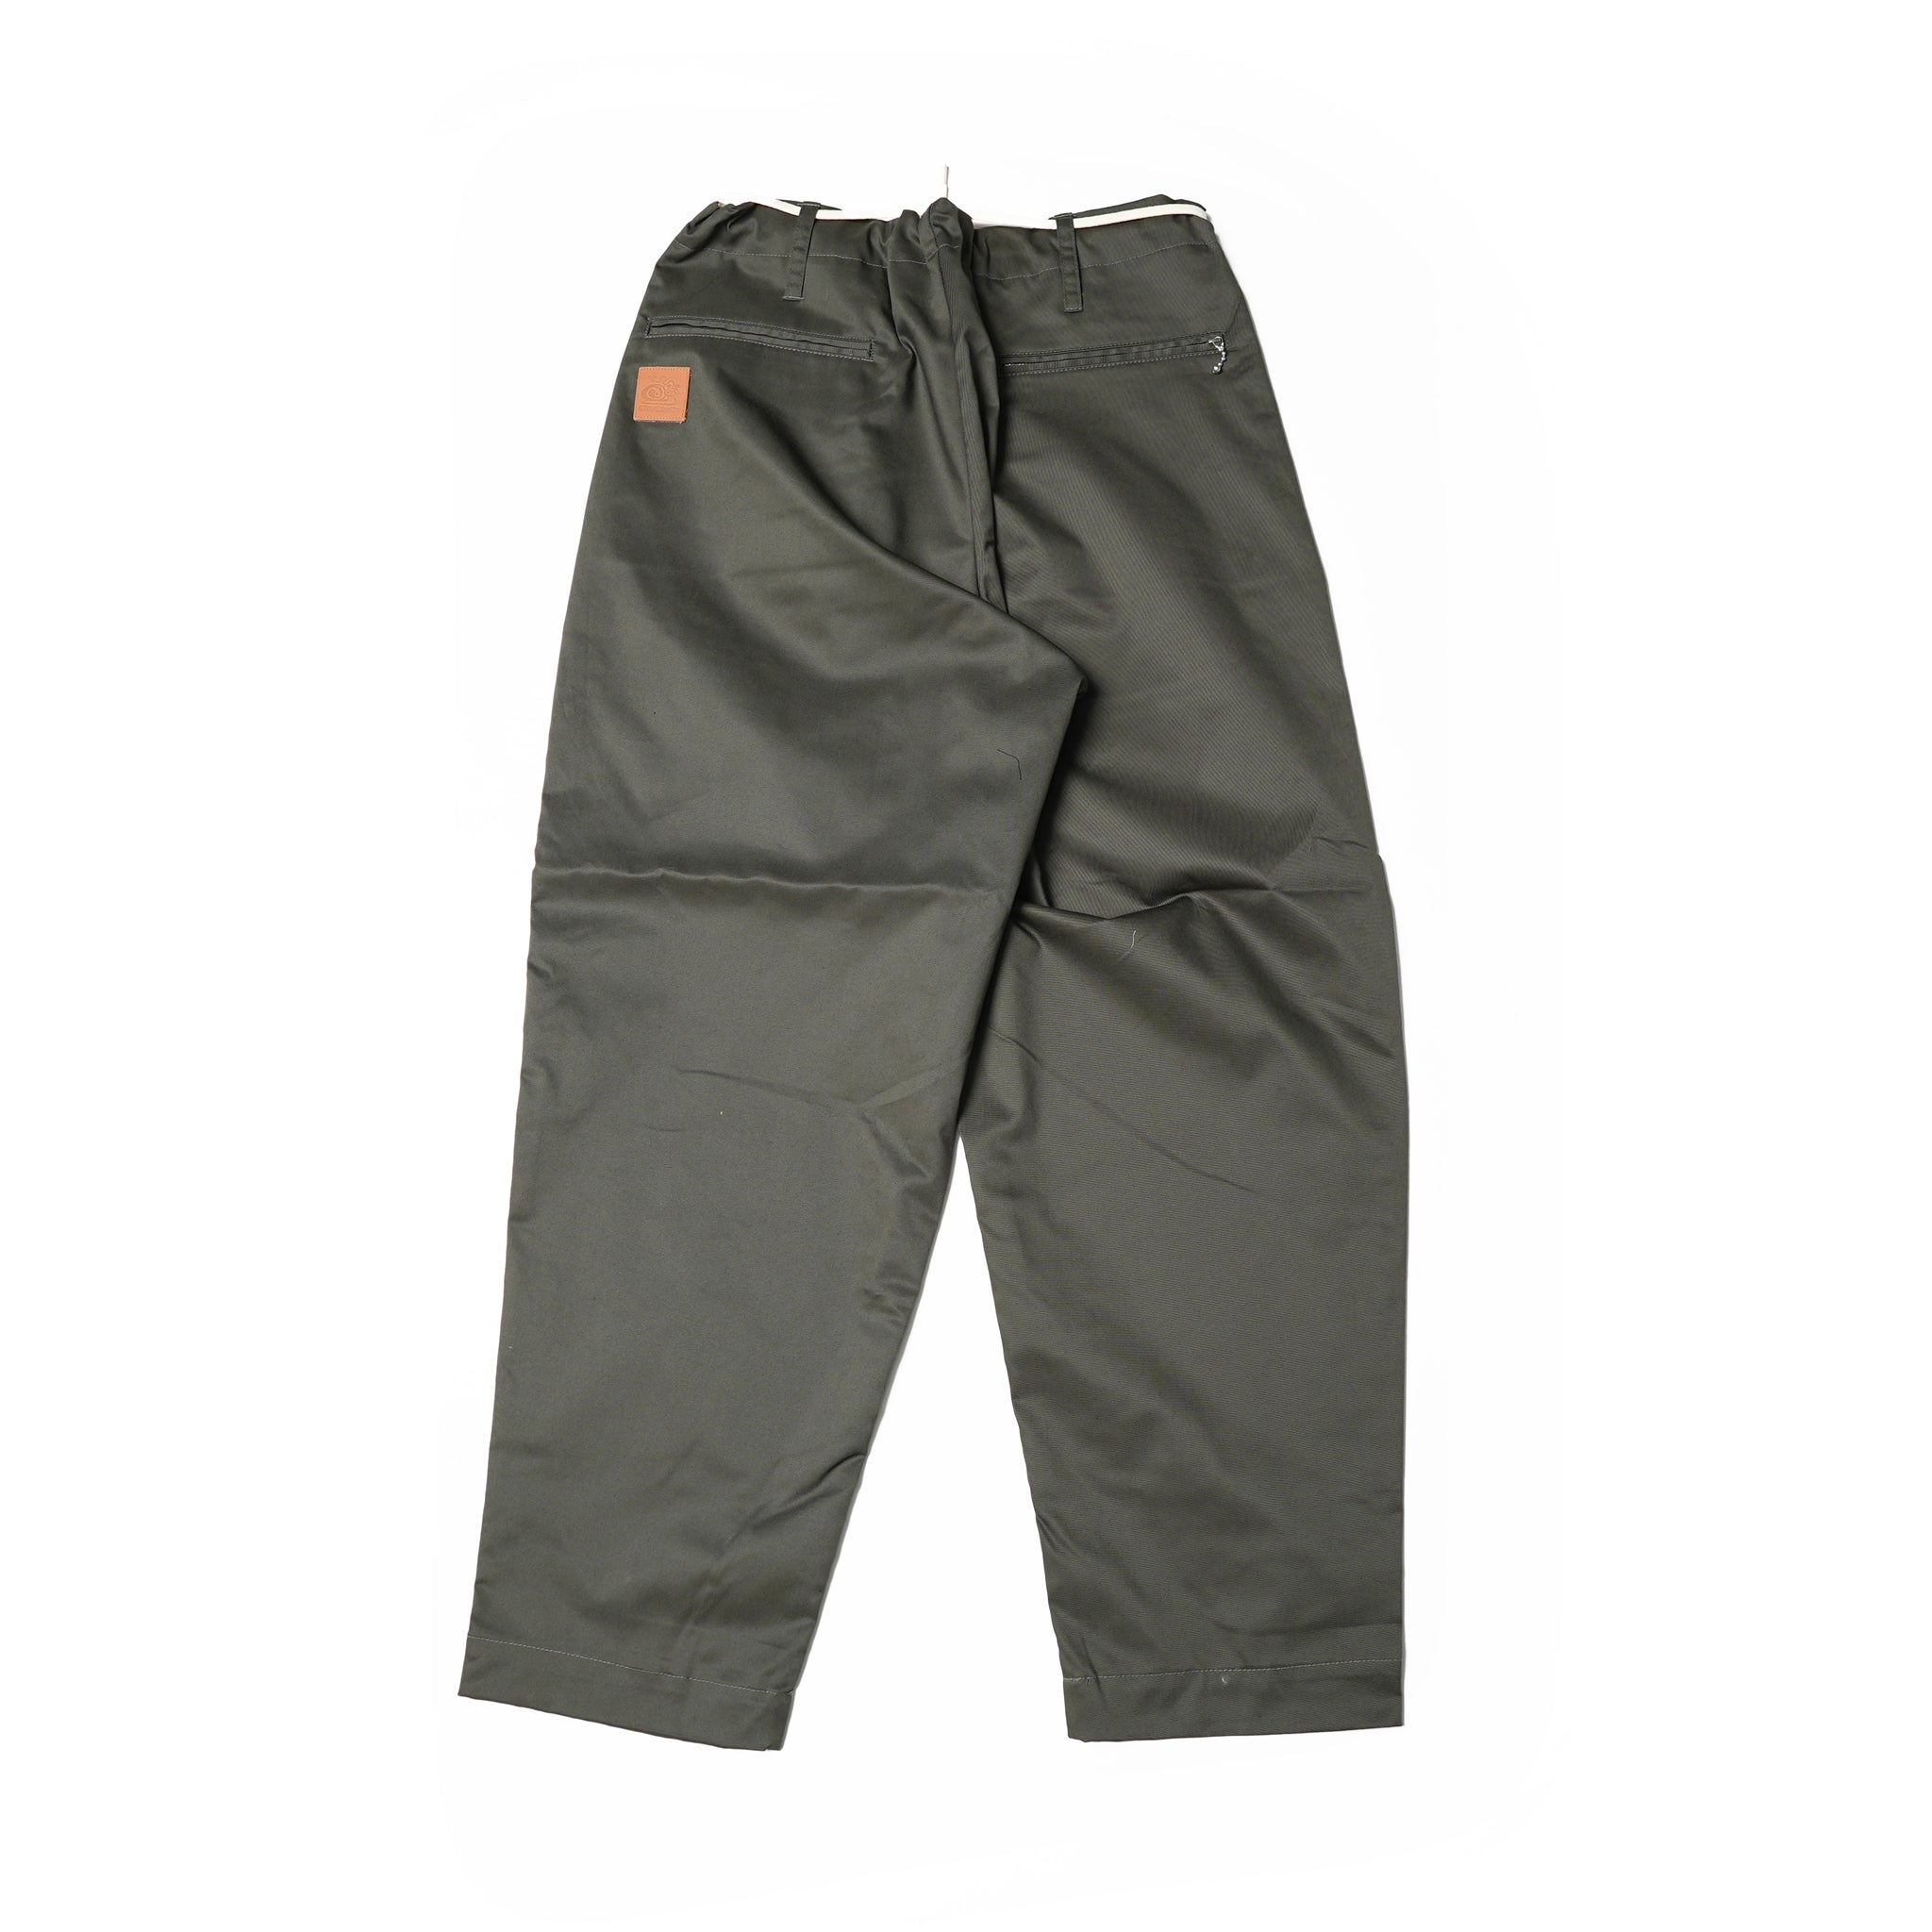 Name: Non-Elastic E-Z Pants Dead Stock Fabric Collection | Color:Olive | Size: One Fits All 【CITYLIGHTS PRODUCTS_シティライツプロダクツ】